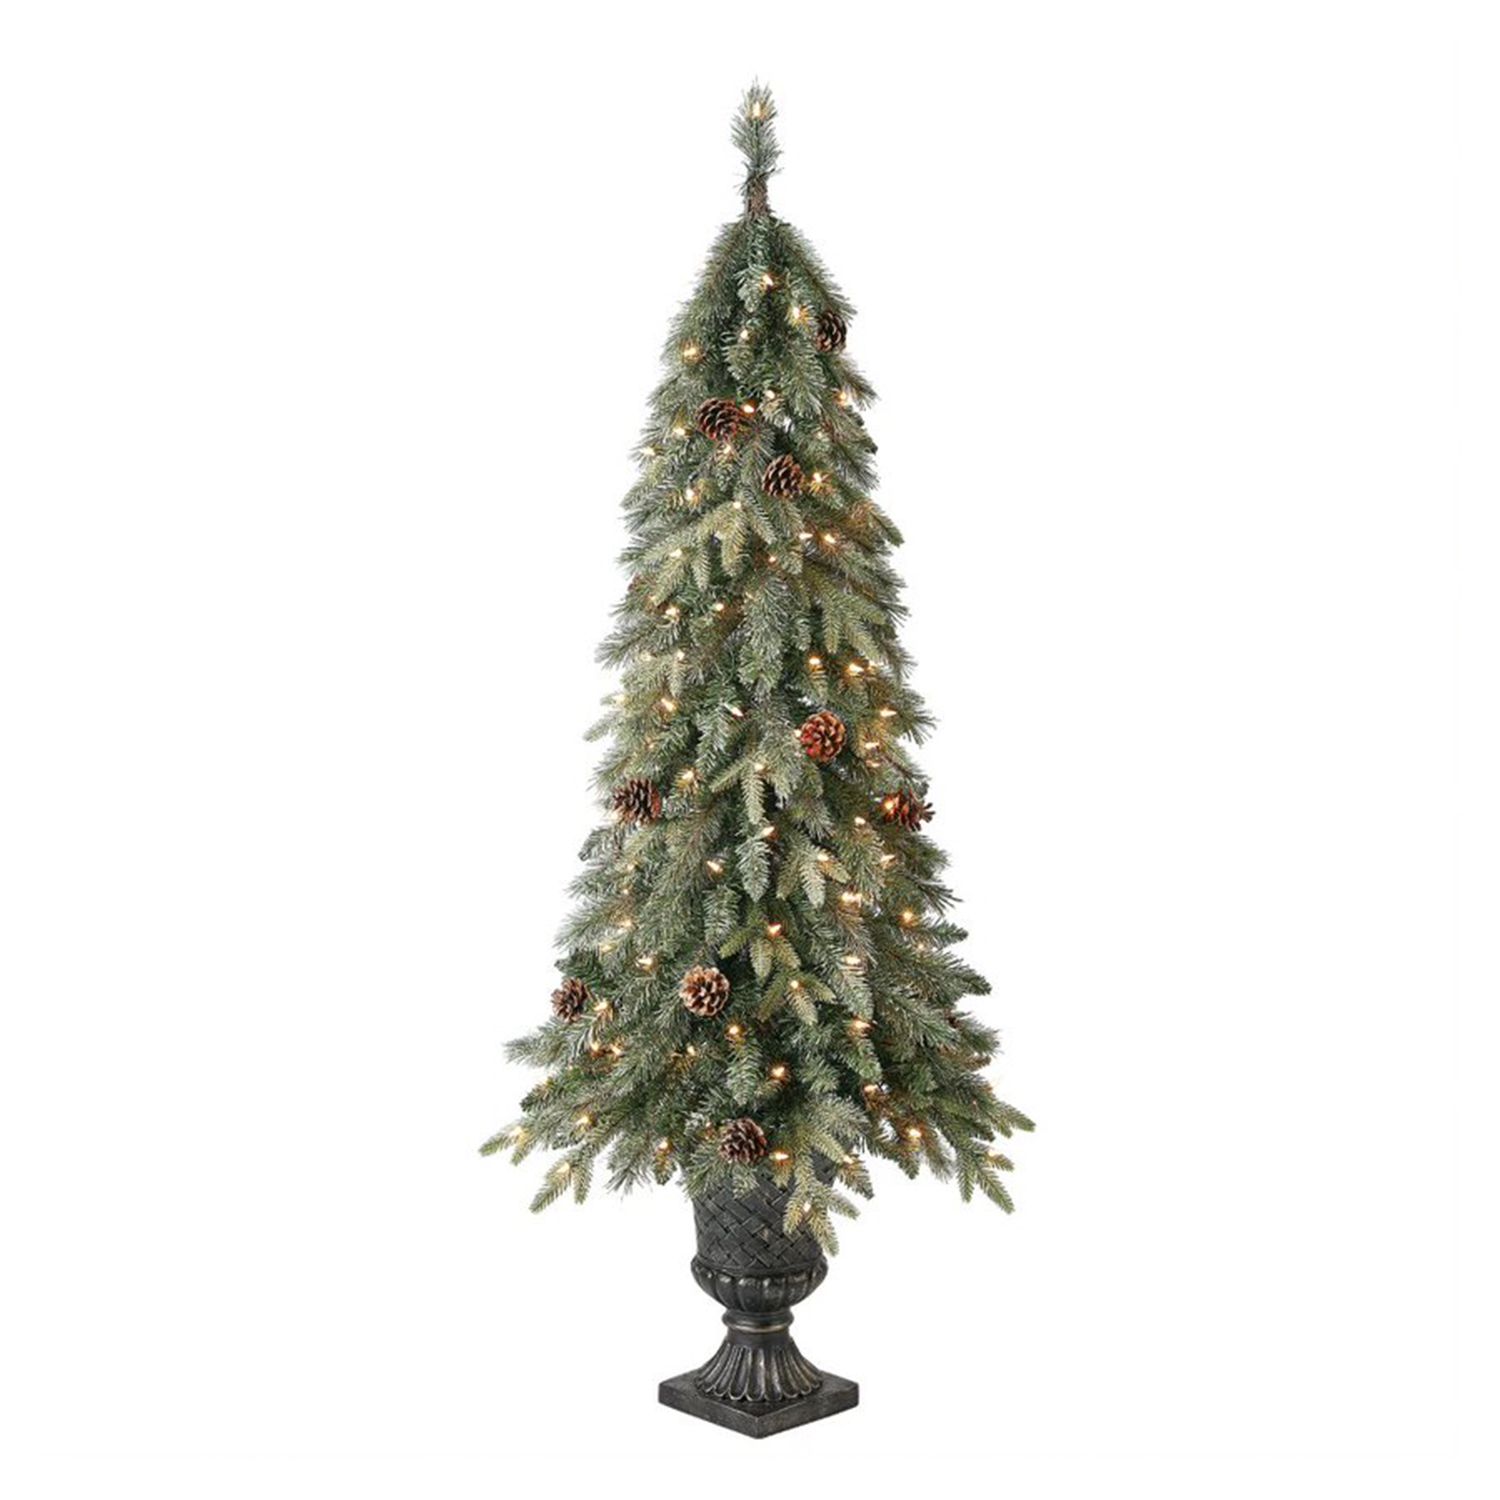 Image for Home Heritage Entryway 5 Foot Christmas Tree With White Lights and Pinecones at Kohl's.